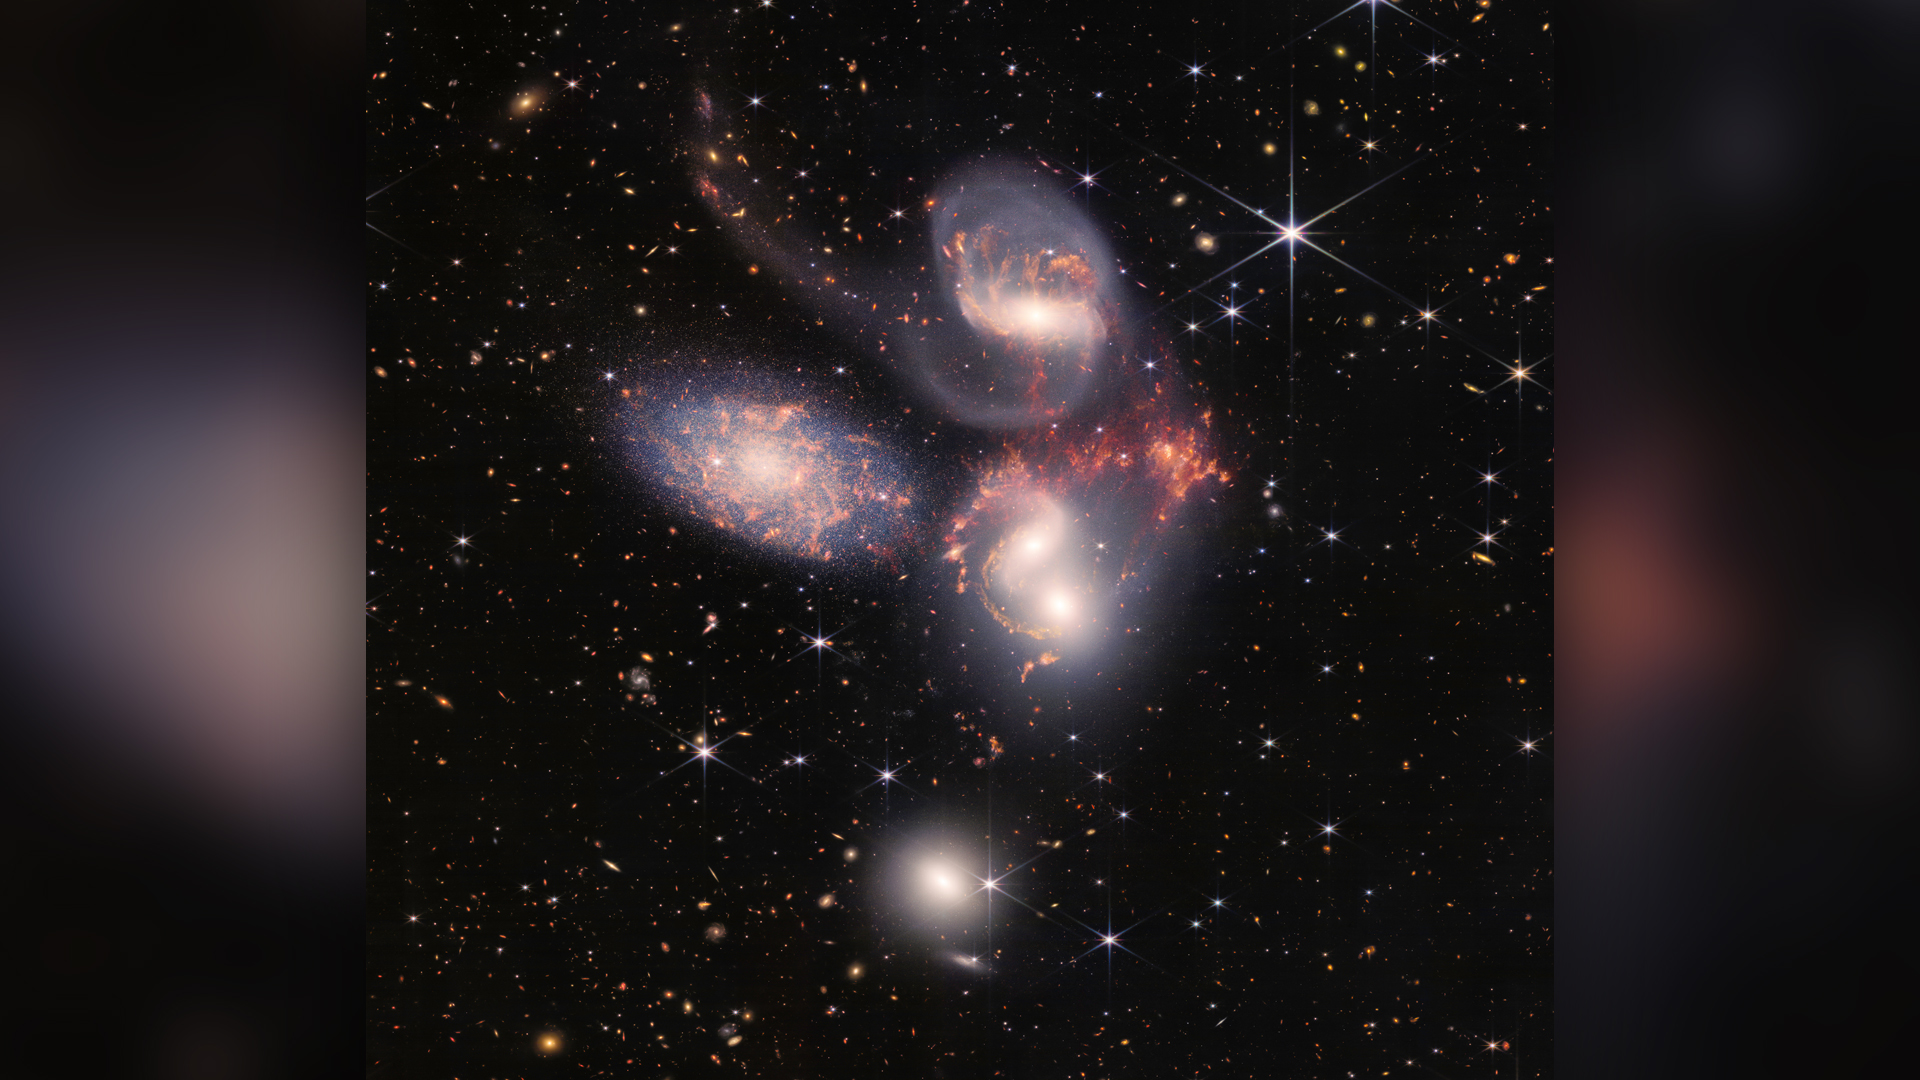 Stephan’s Quintet, a visual grouping of five galaxies, is best known for being prominently featured in the holiday classic film, “It’s a Wonderful Life.” Today, NASA’s James Webb Space Telescope reveals Stephan’s Quintet in a new light.